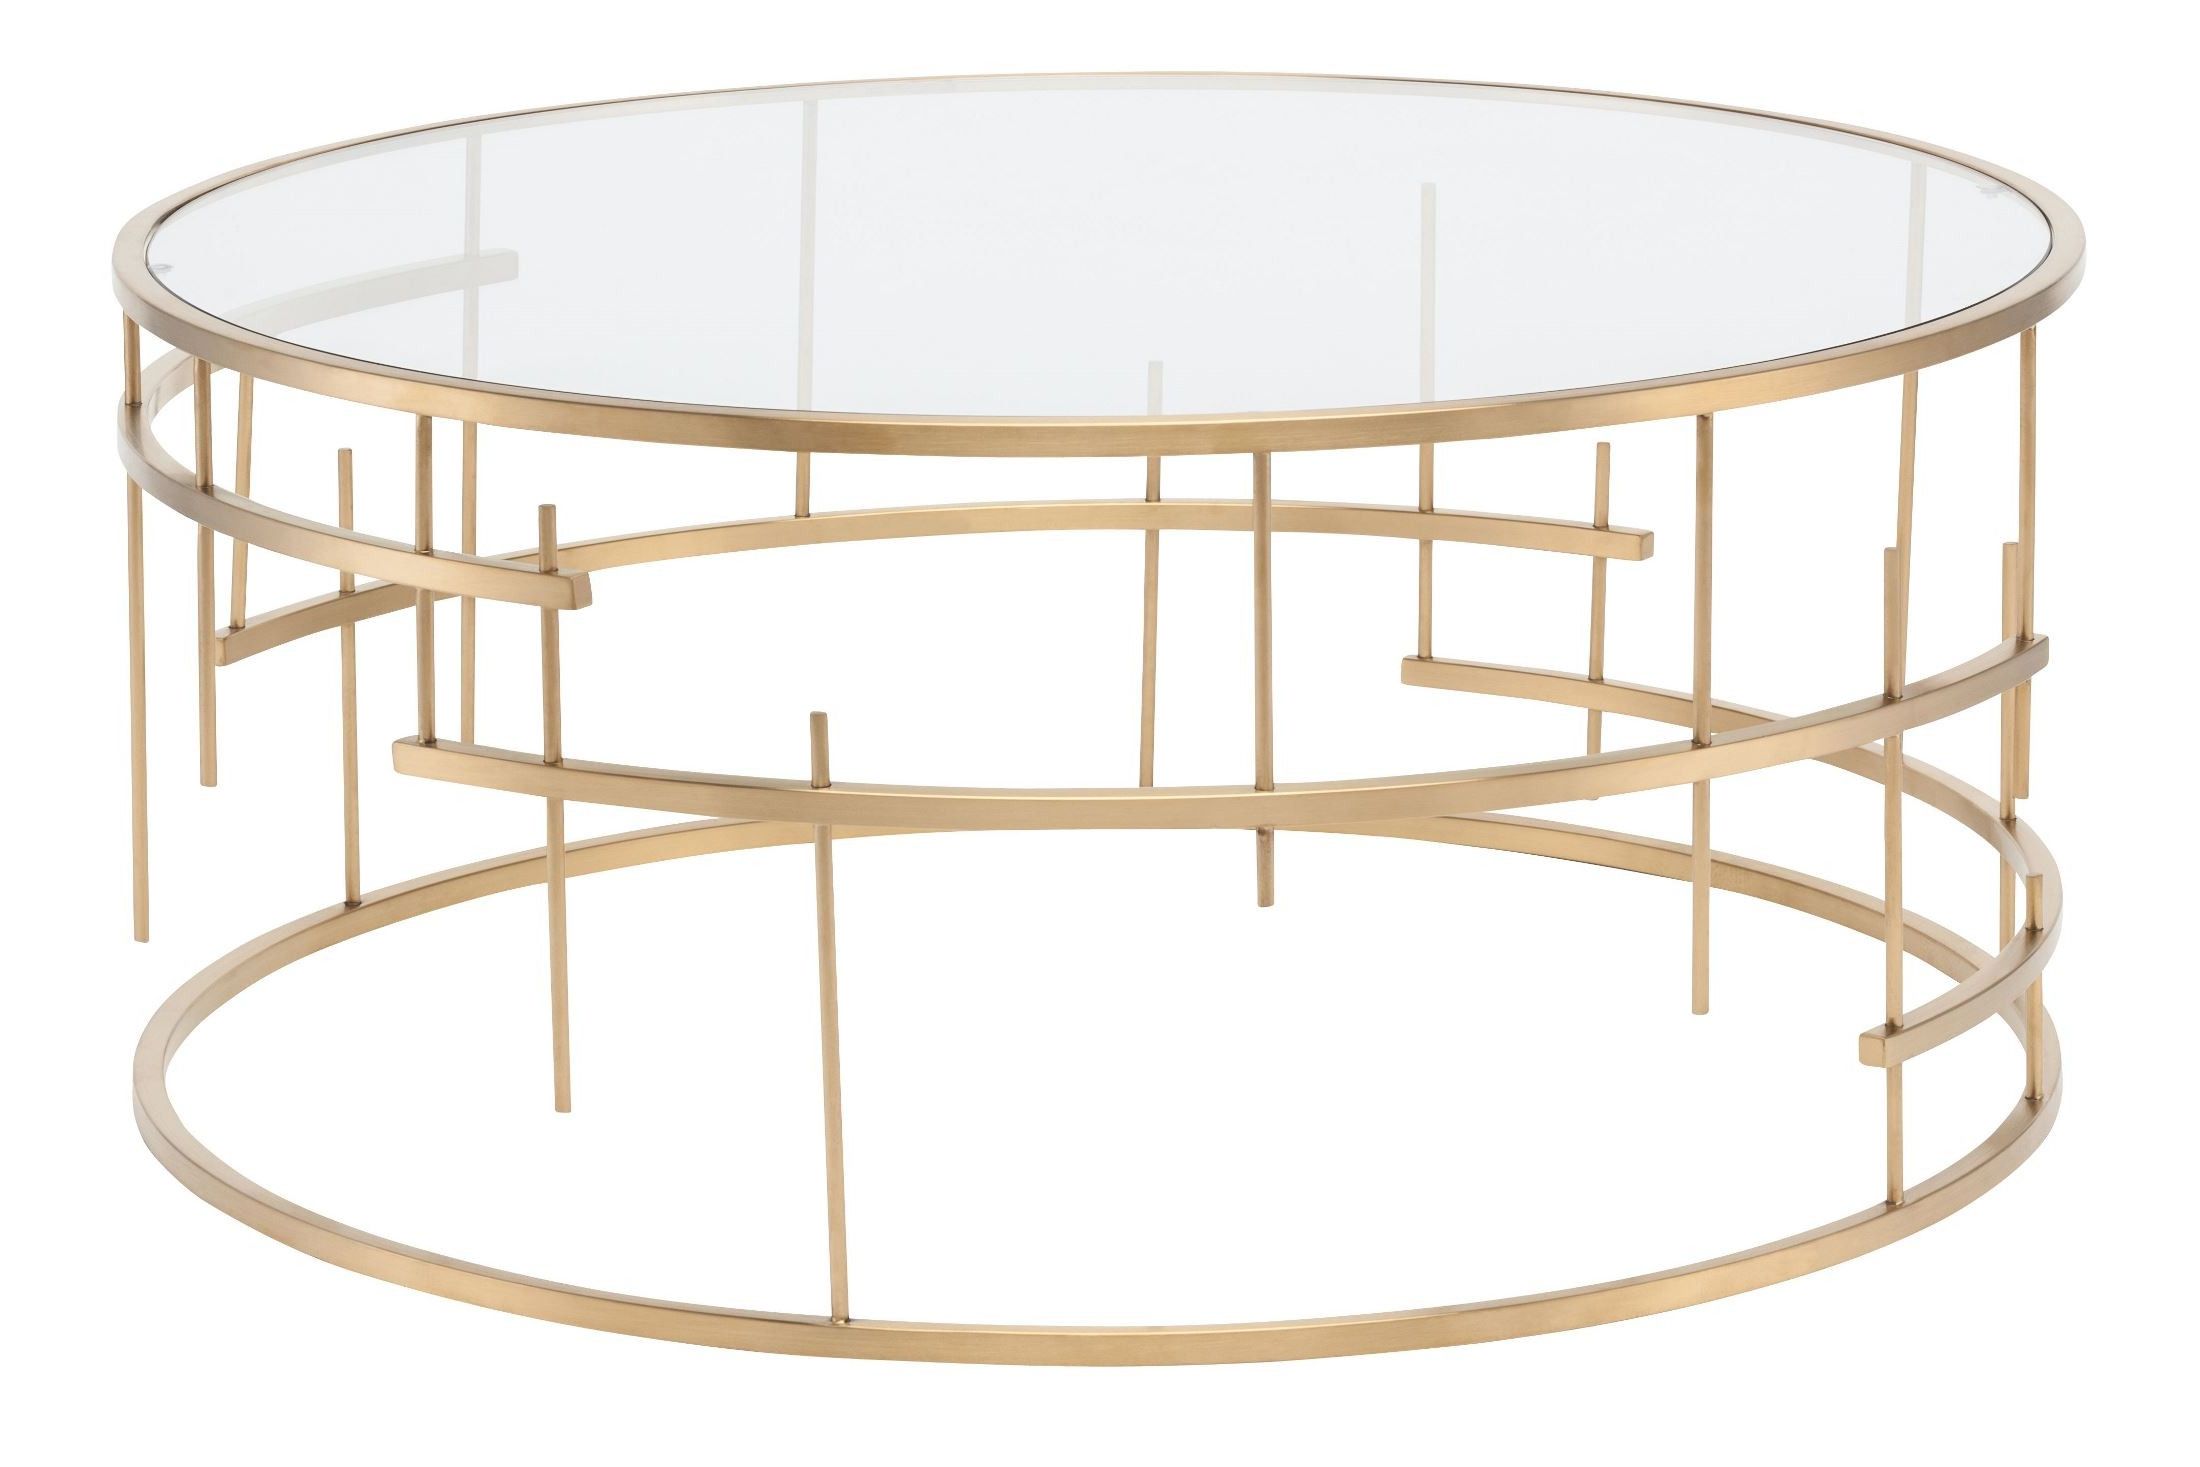 Tiffany Brushed Gold Stainless Coffee Table From Nuevo Inside 2019 Square Black And Brushed Gold Coffee Tables (Gallery 10 of 20)